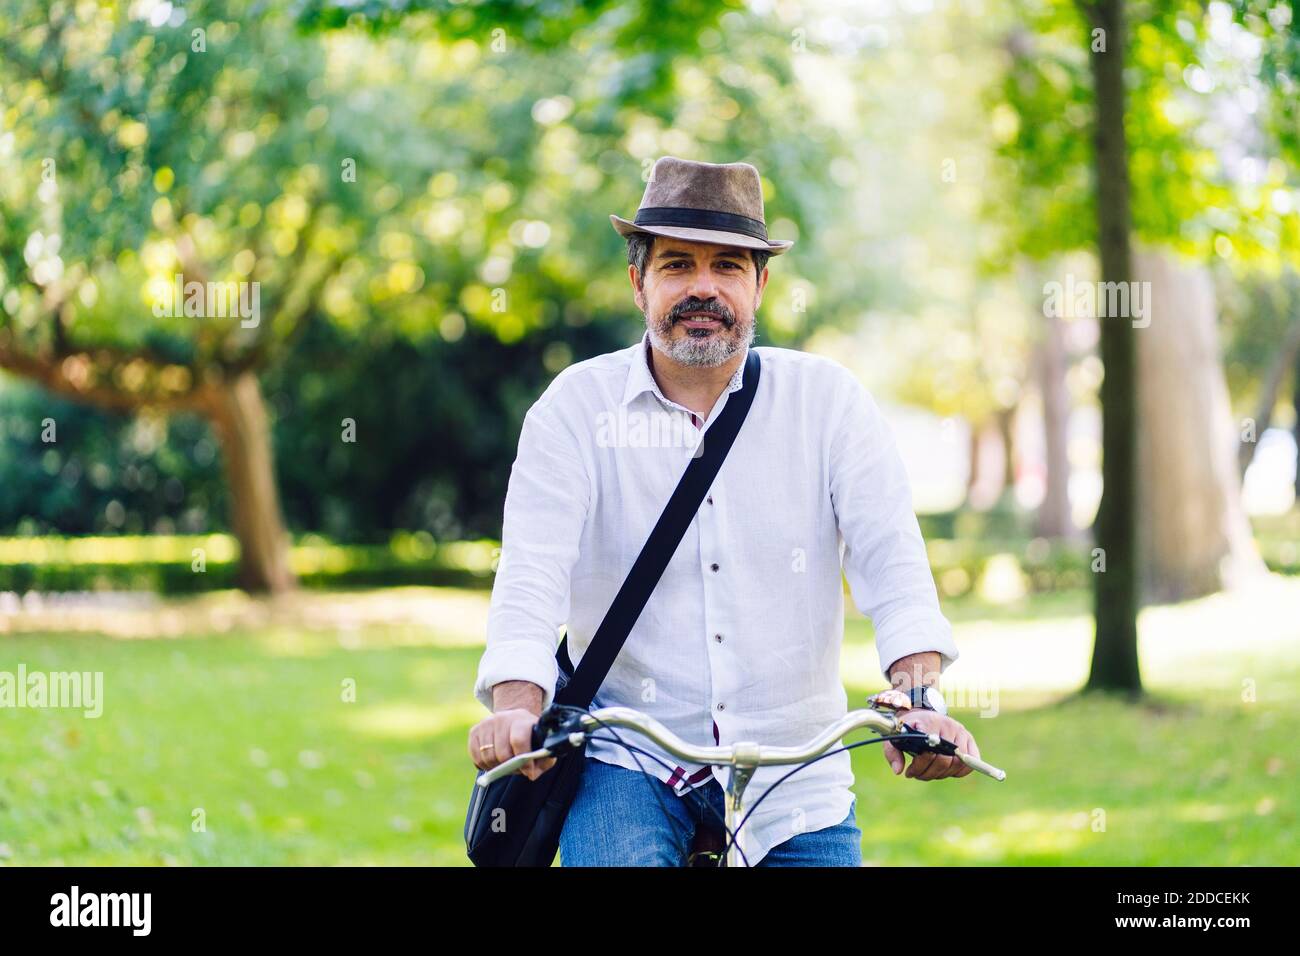 Mature man smiling while cycling in park Stock Photo